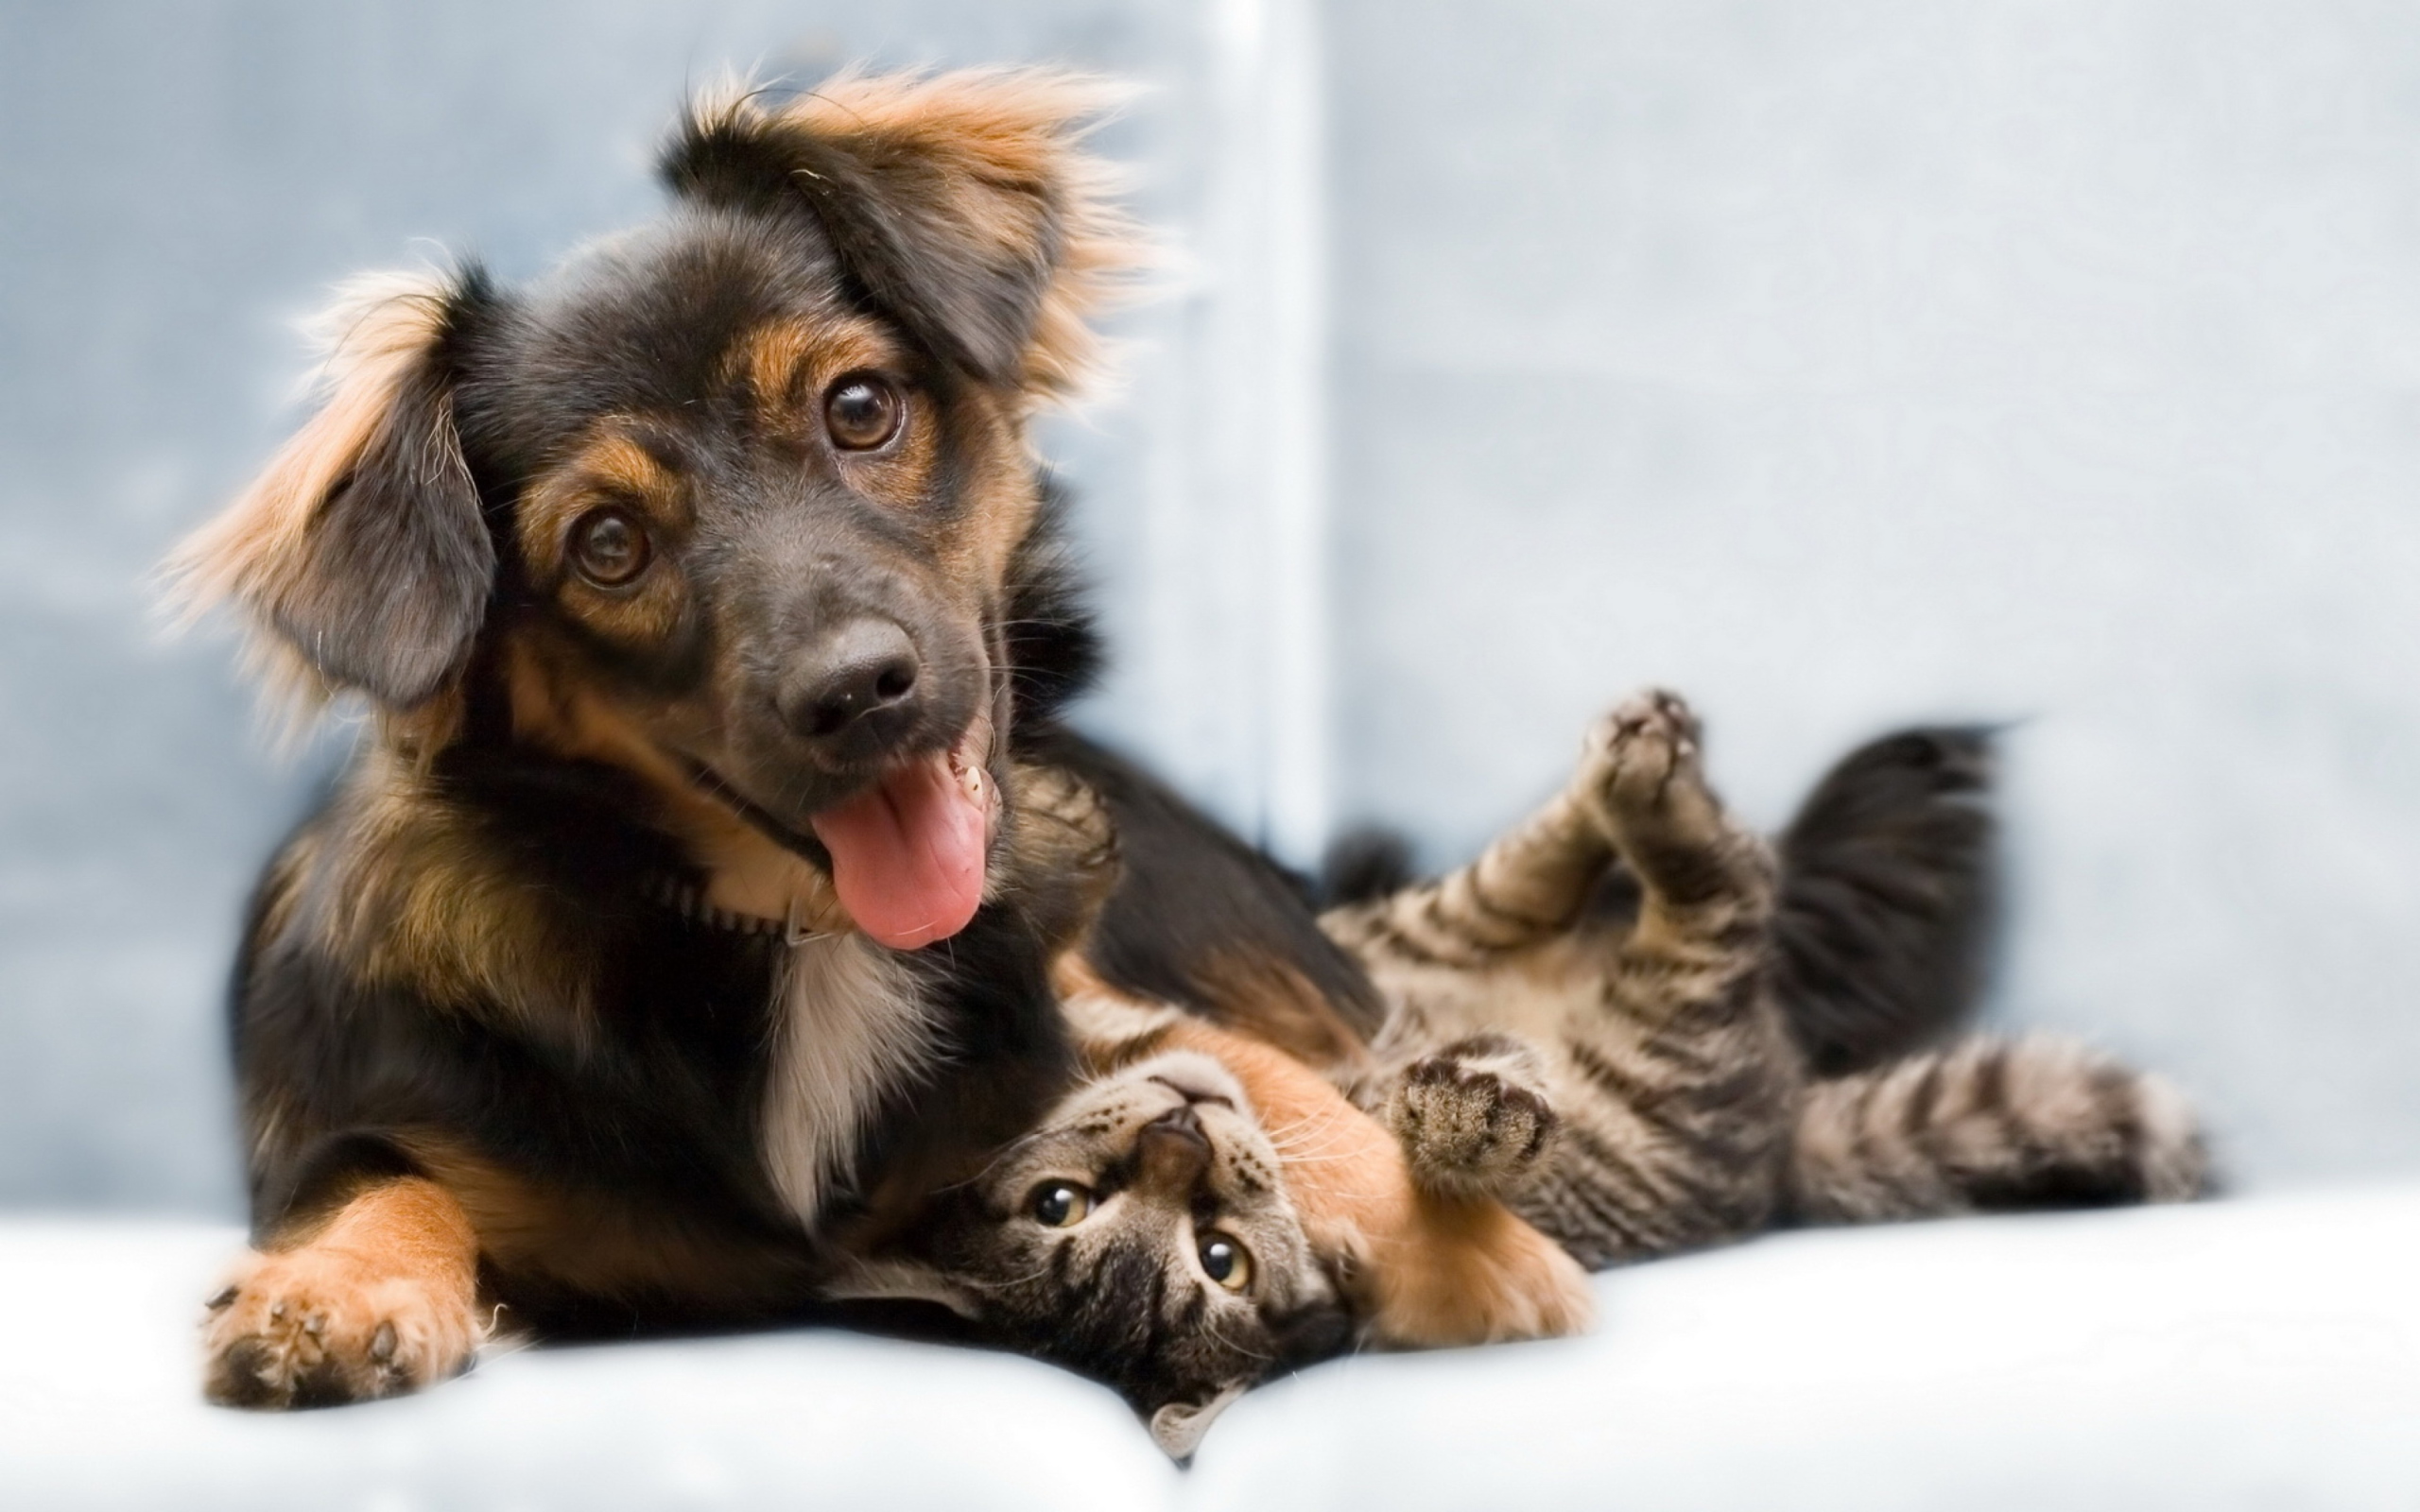 Dog and Cat wallpaper 2560x1600